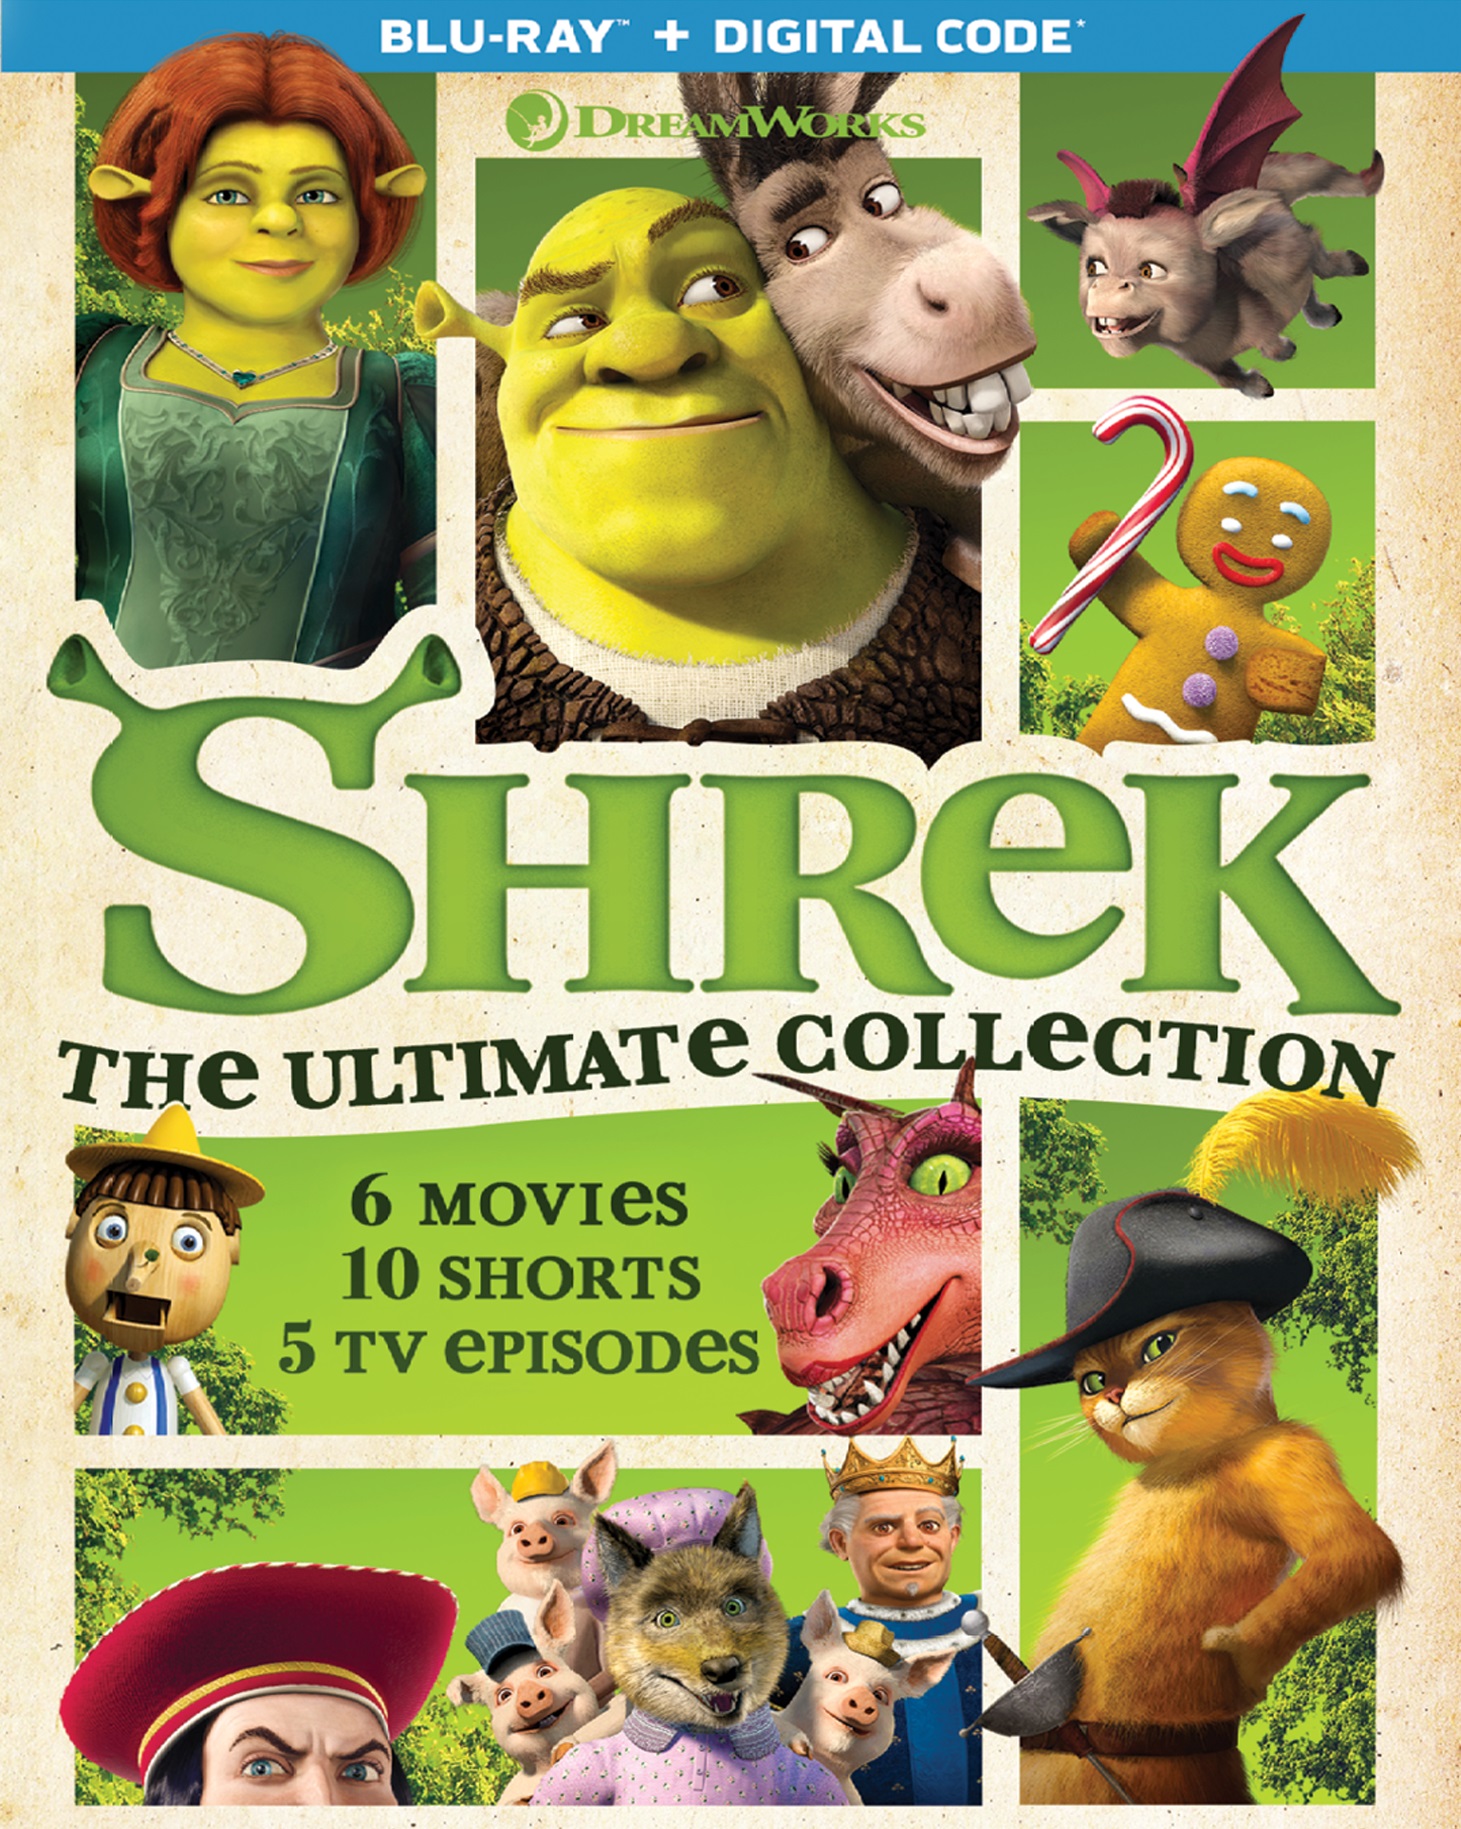 Ultimate collection